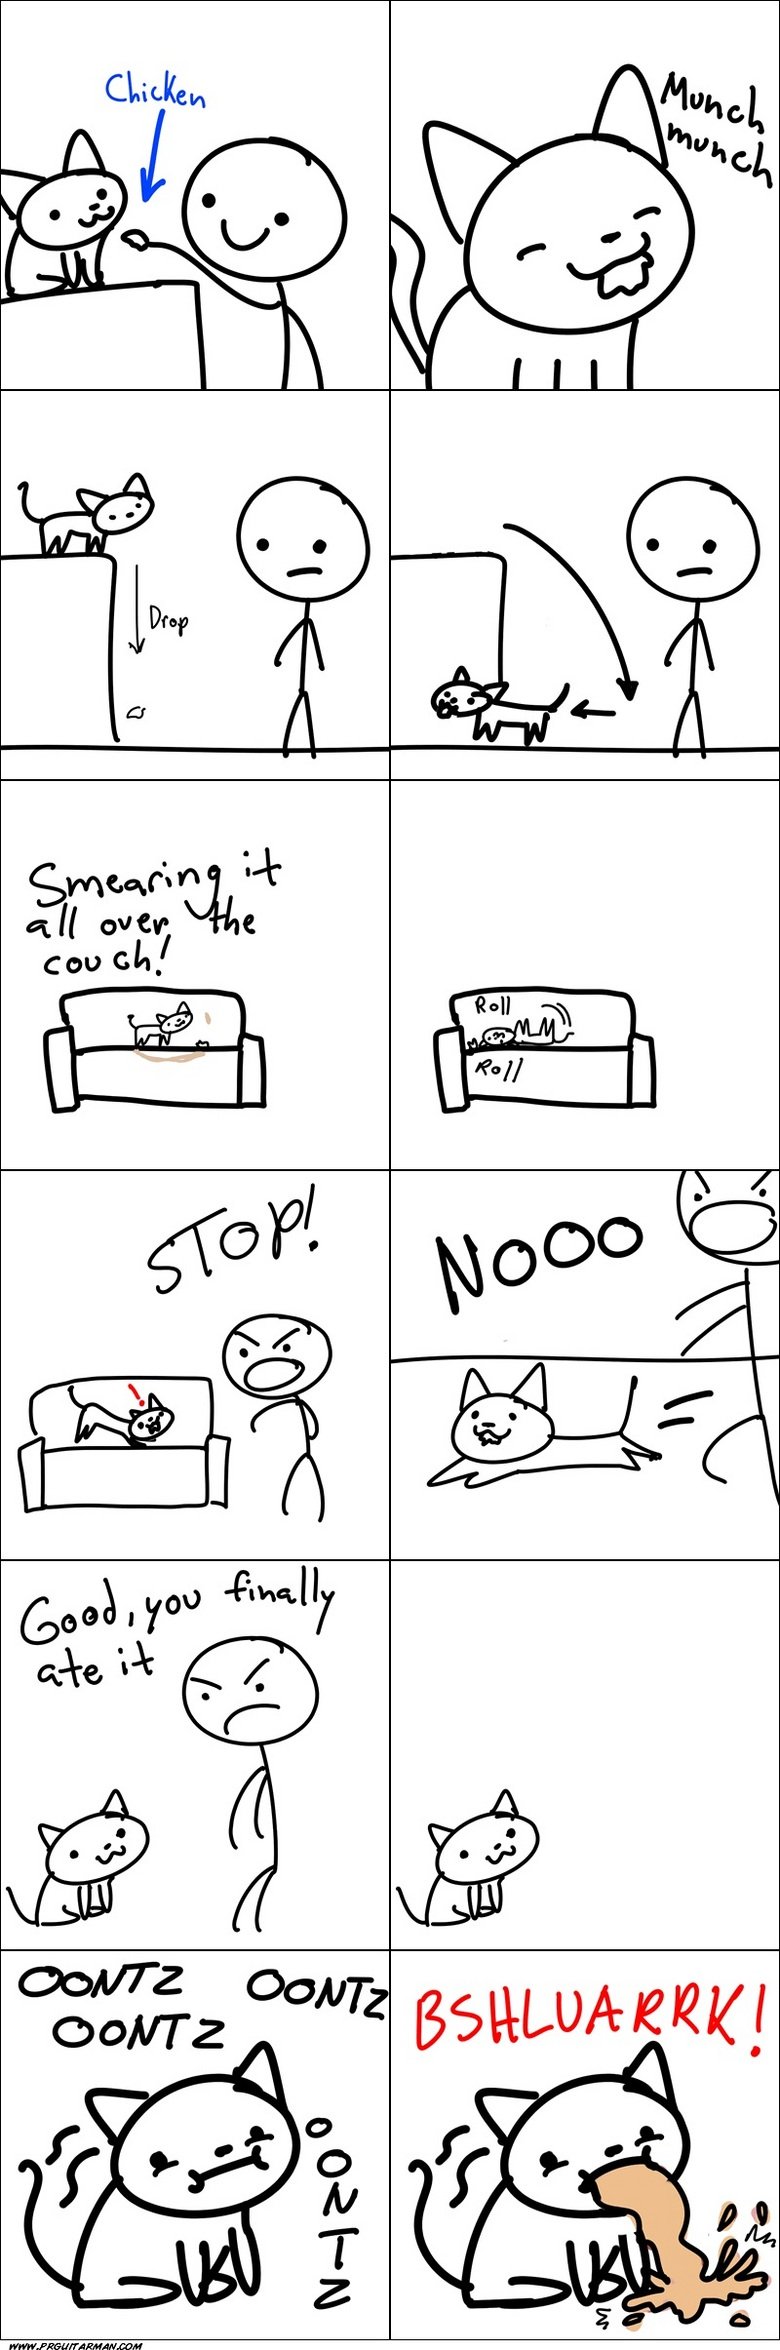 Stupid cats always do this